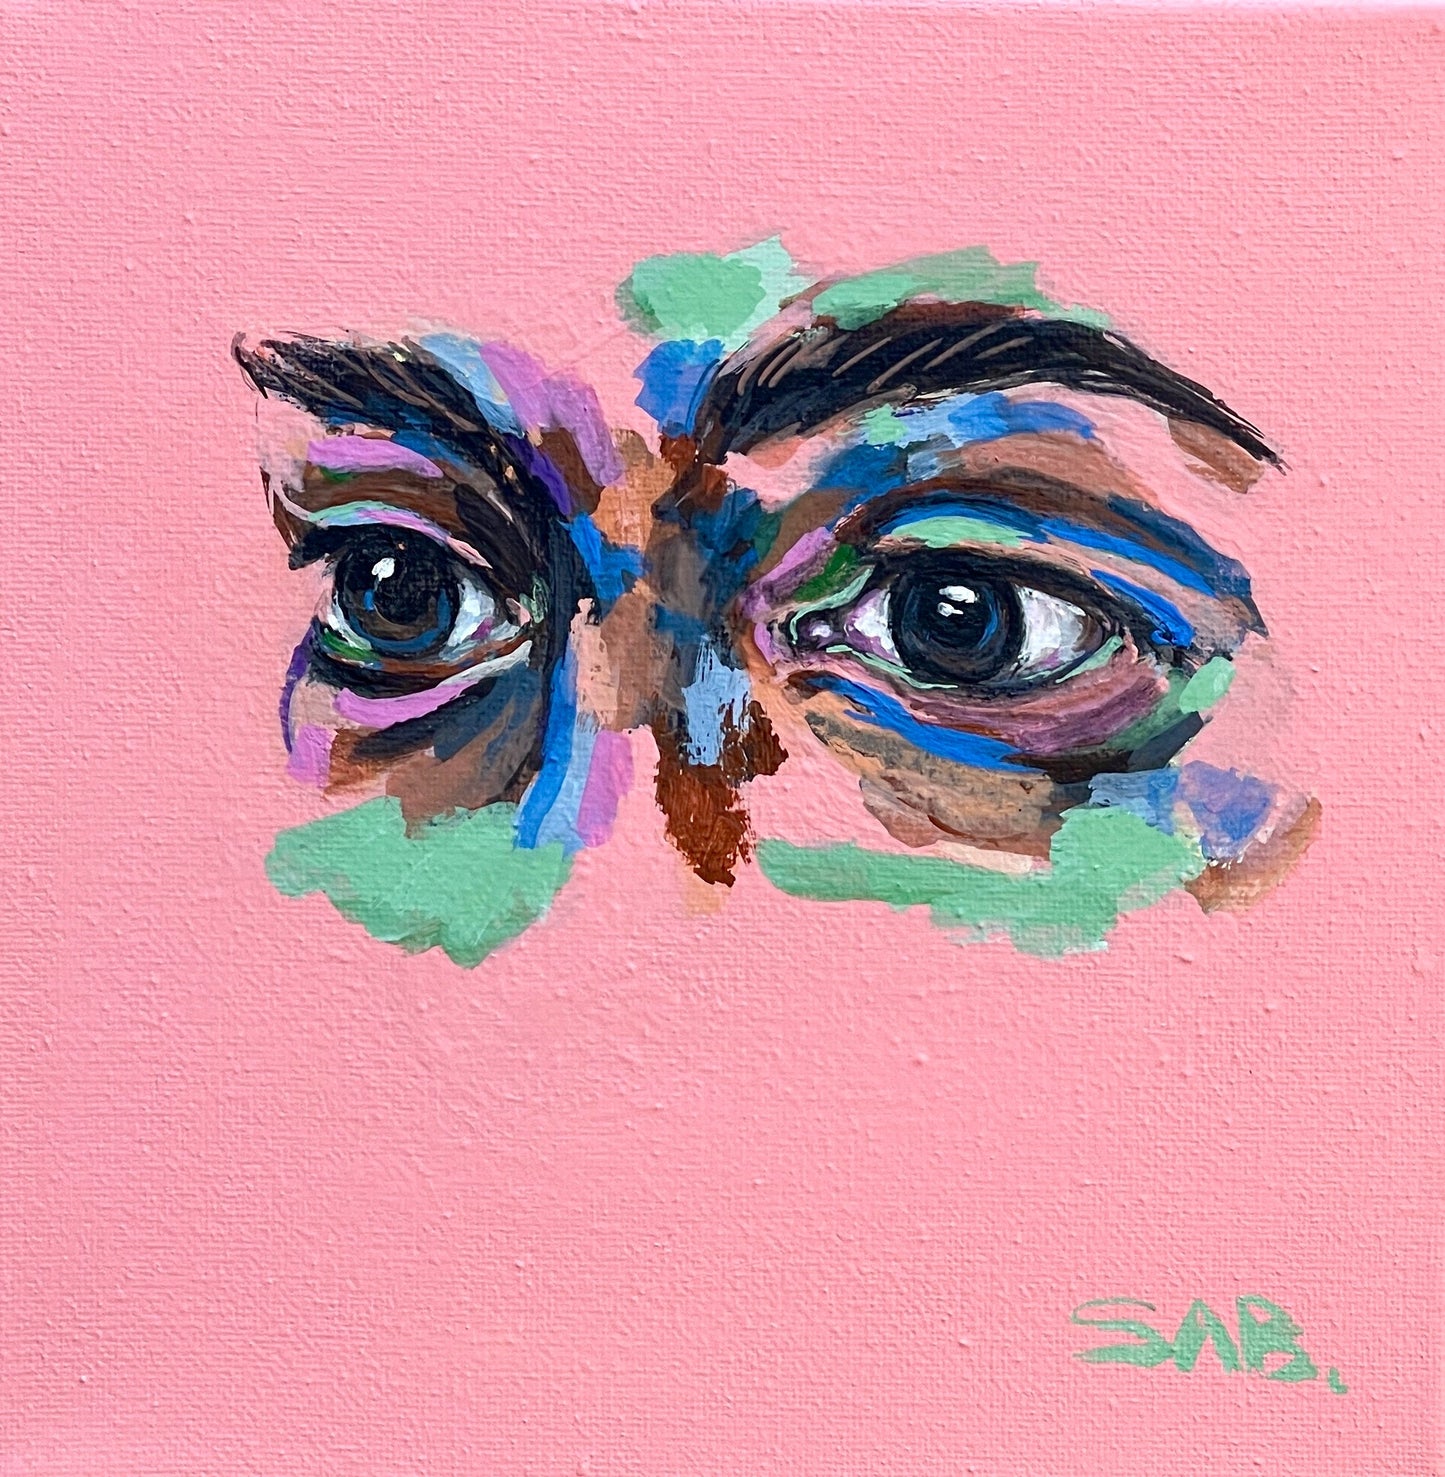 Abstract acrylic eye painting by SABtheartist